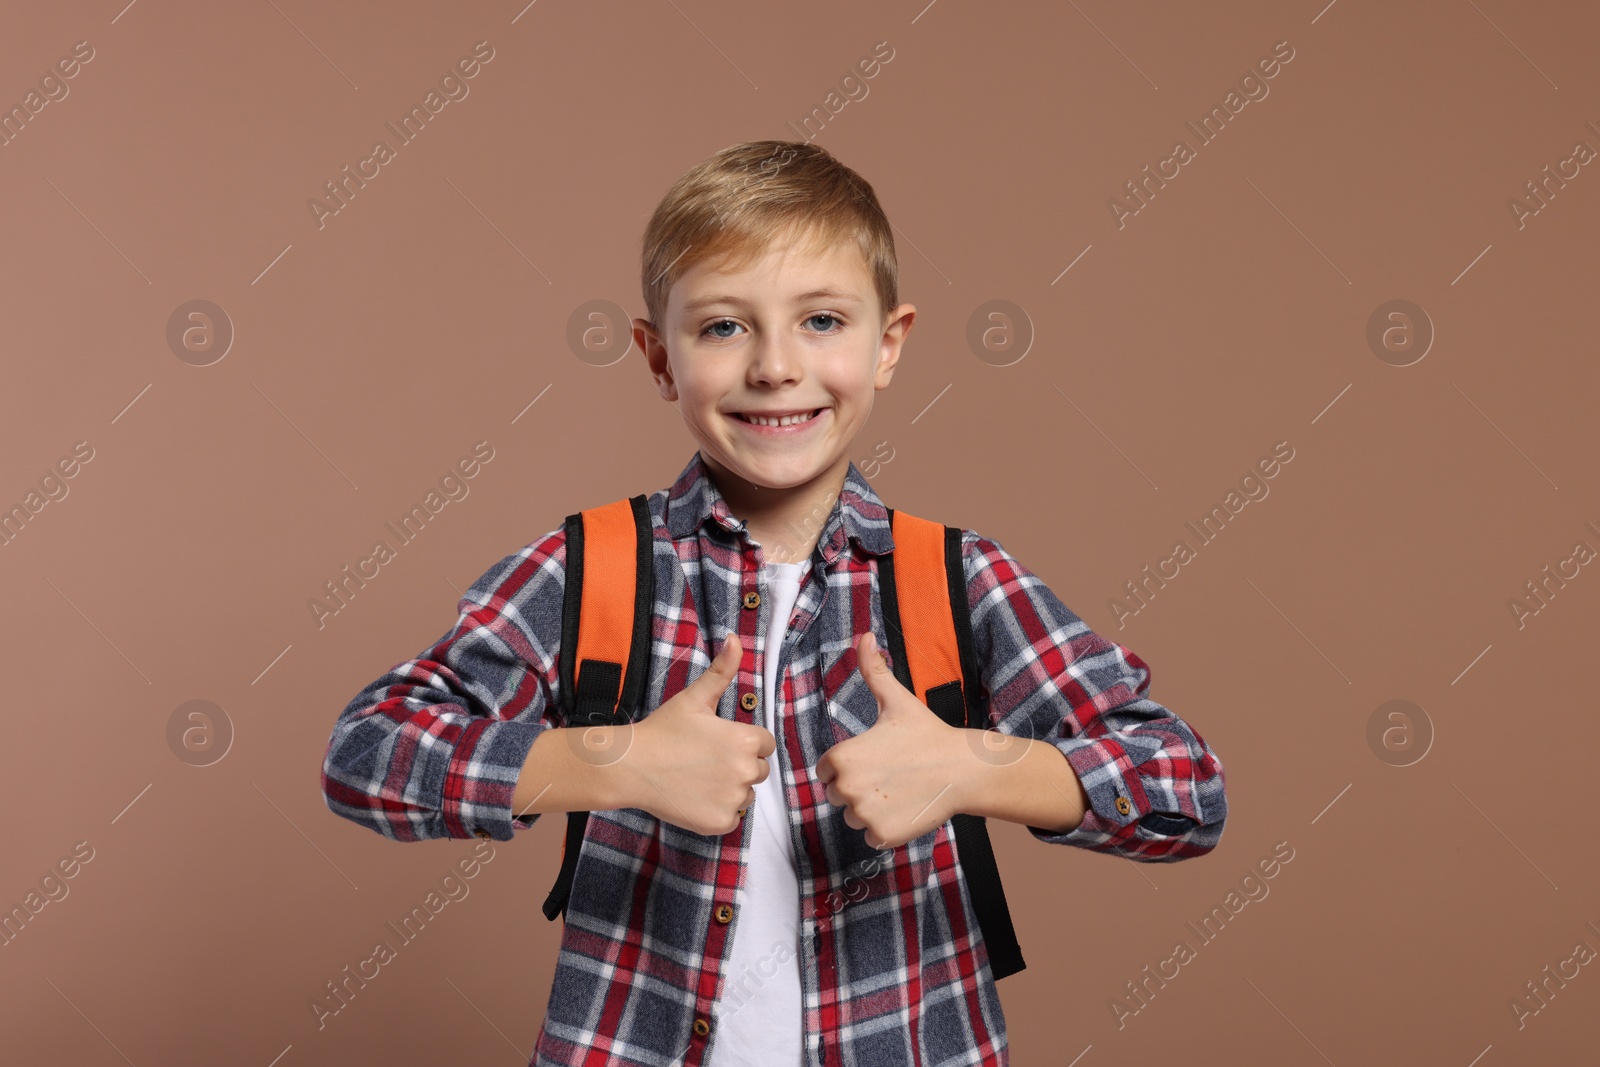 Photo of Happy schoolboy with backpack showing thumbs up gesture on brown background